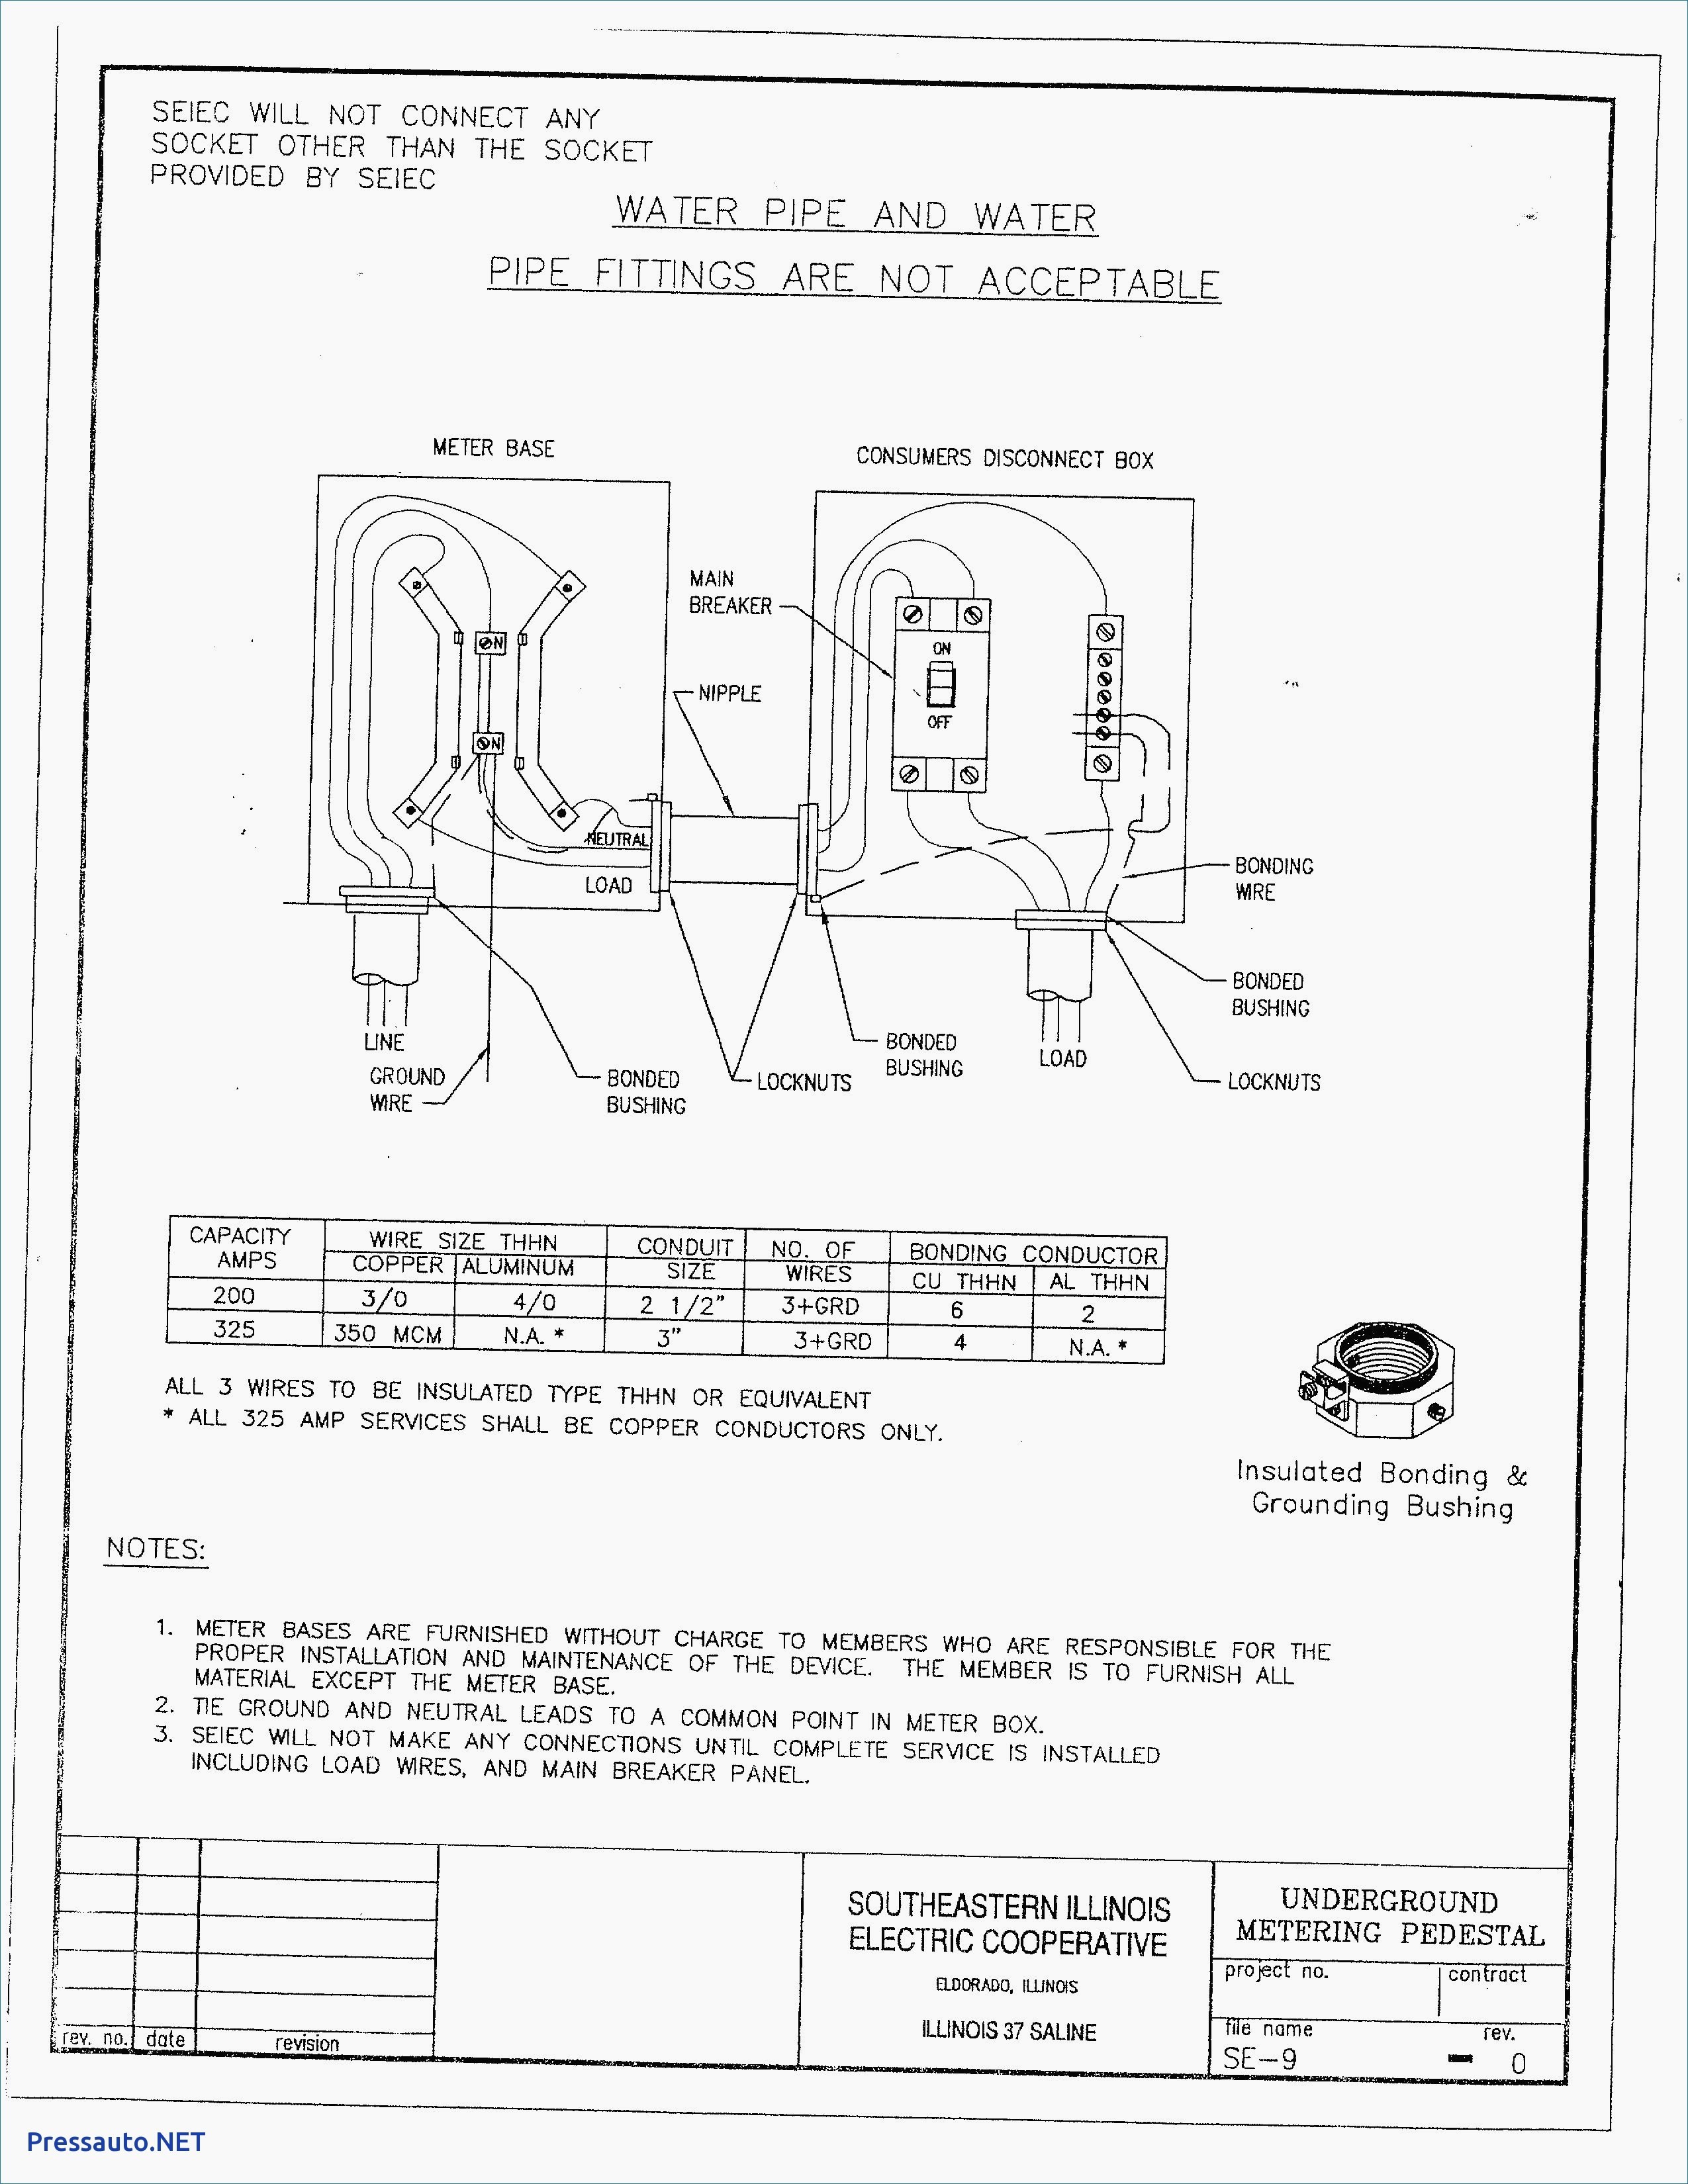 200 Amp Meter Base Wiring Diagram Lovely Amazing Service Conductor Wire Size Electrical and Wiring